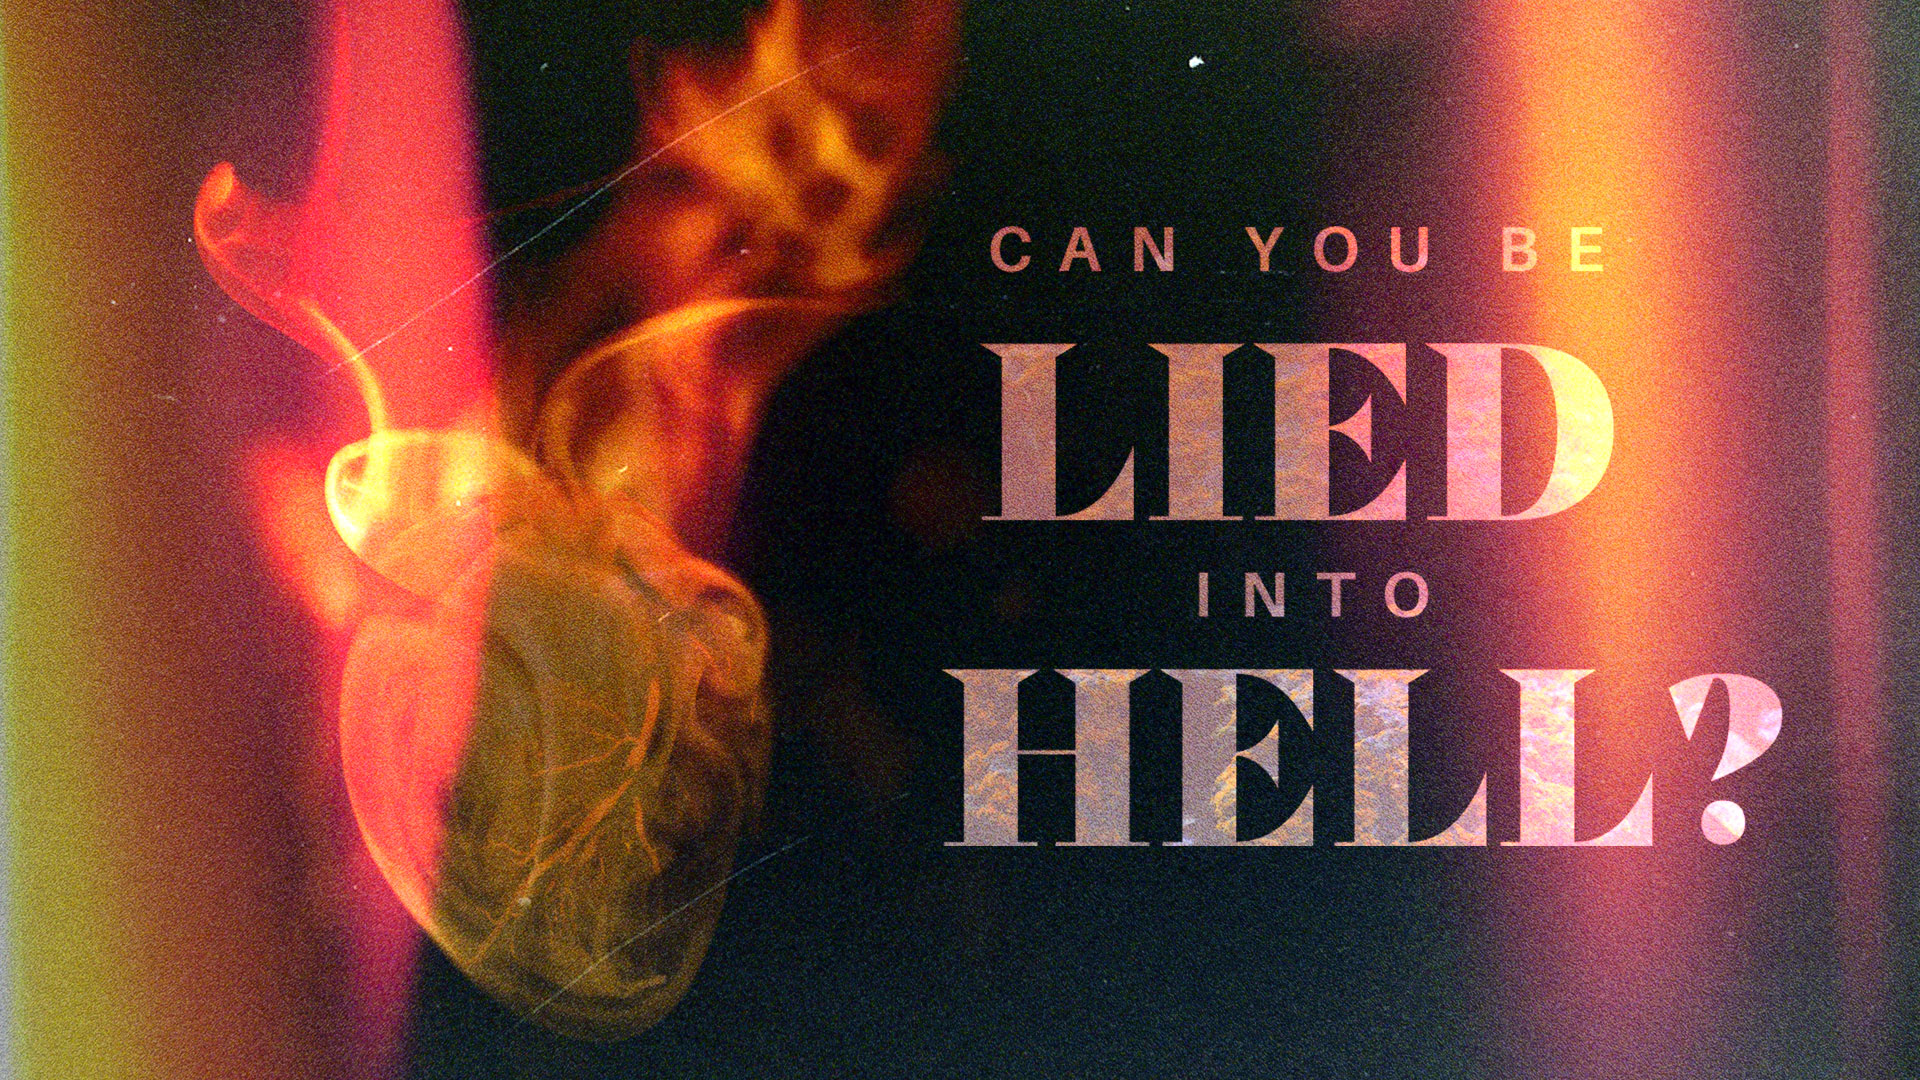 Can You Be Lied Into Hell?